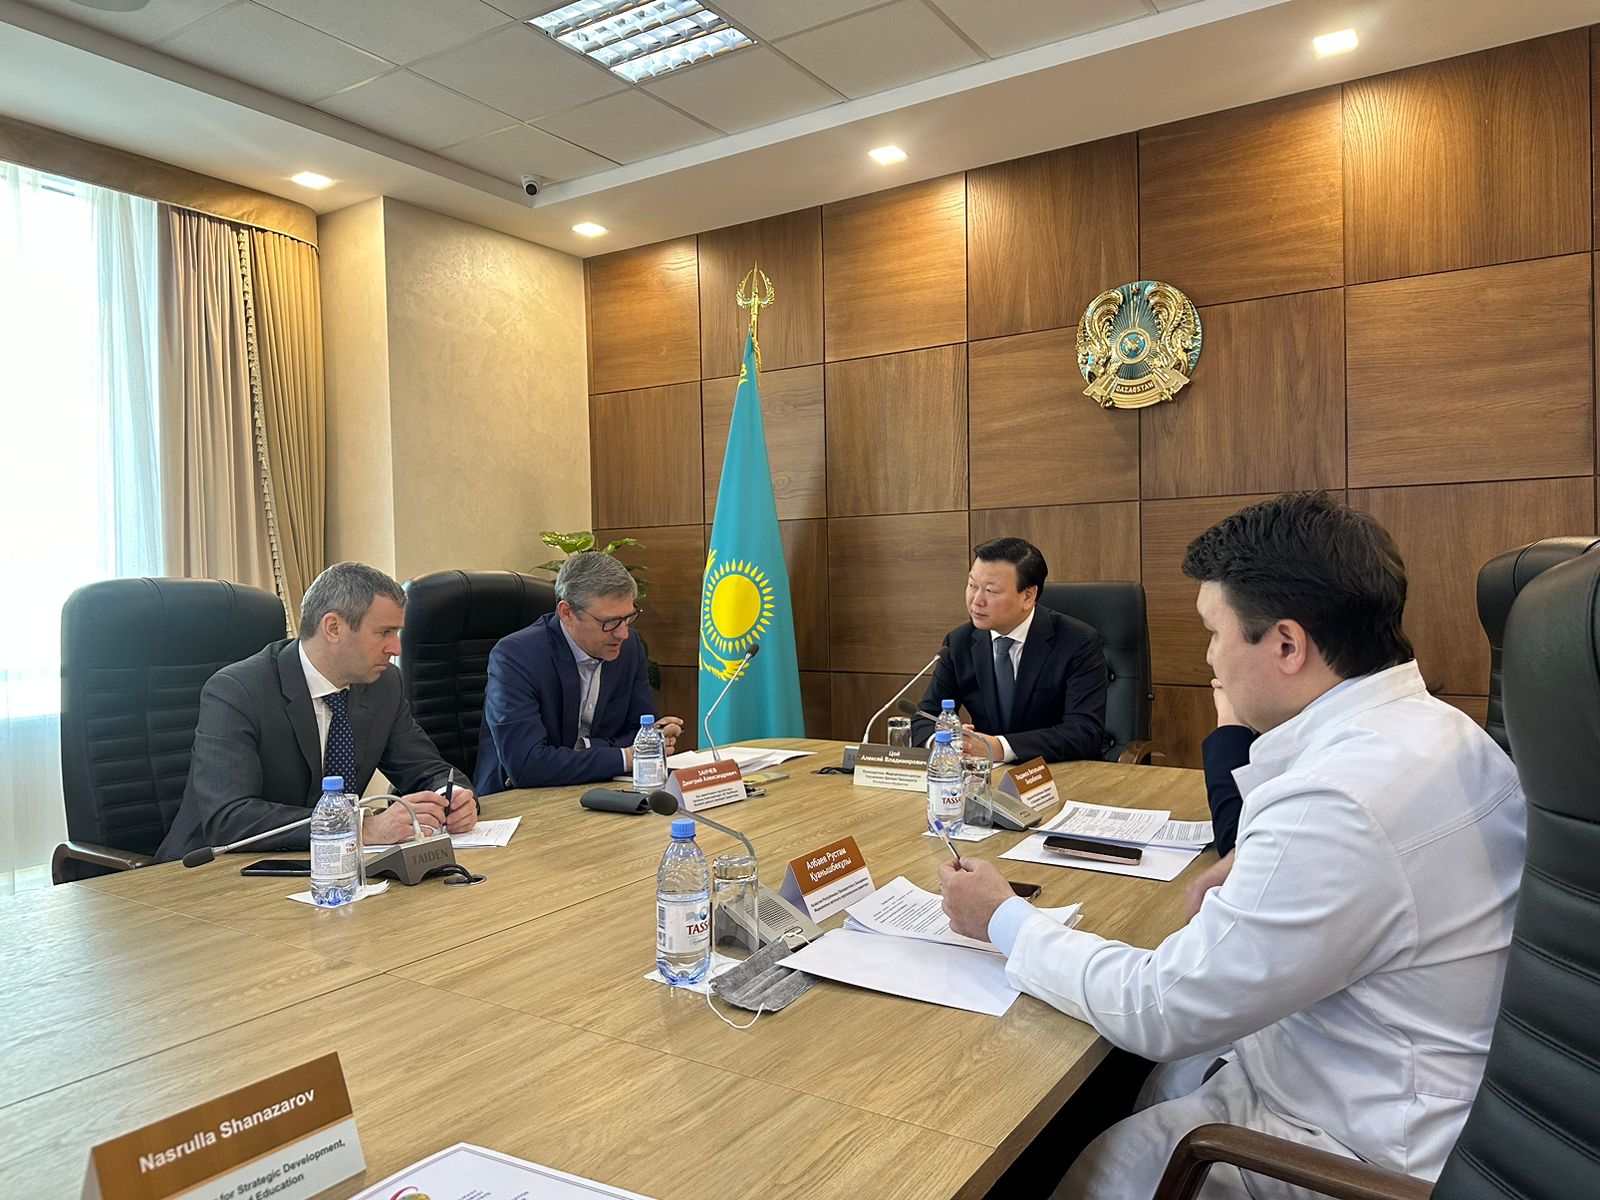 COOPERATION BETWEEN “GENERAL ELECTRIC HEALTHCARE” OF AMERICA AND MEDICAL CENTER OF THE PRESIDENT’S AFFAIRS ADMINISTRATION OF THE REPUBLIC OF KAZAKHSTAN